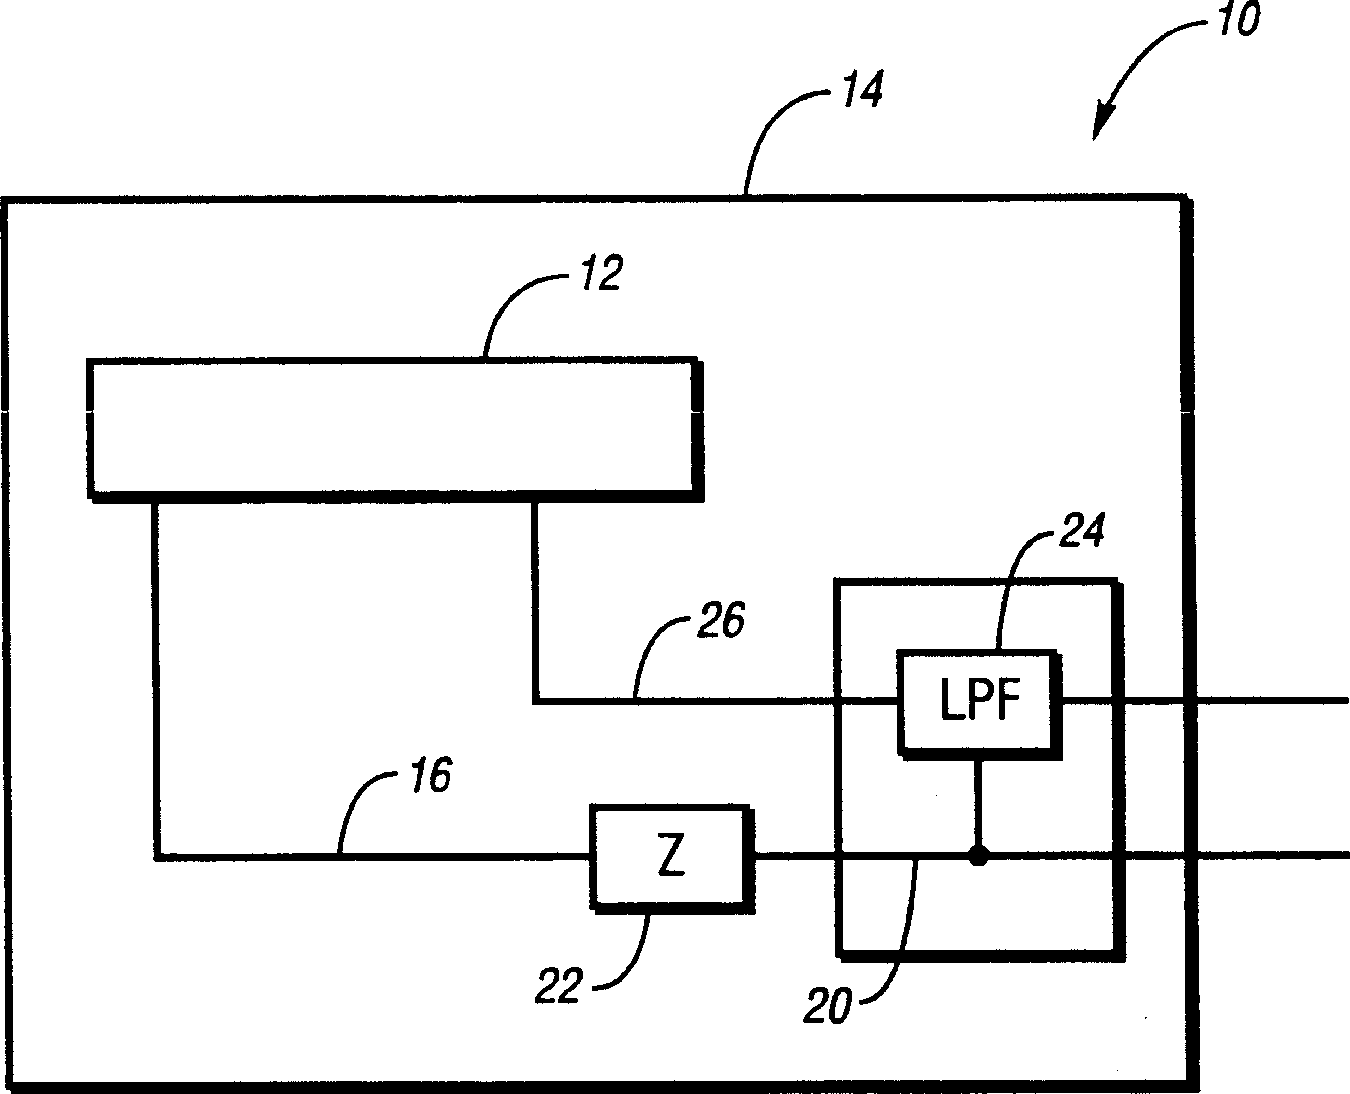 Apparatus reducing radiated emission from electronic modules